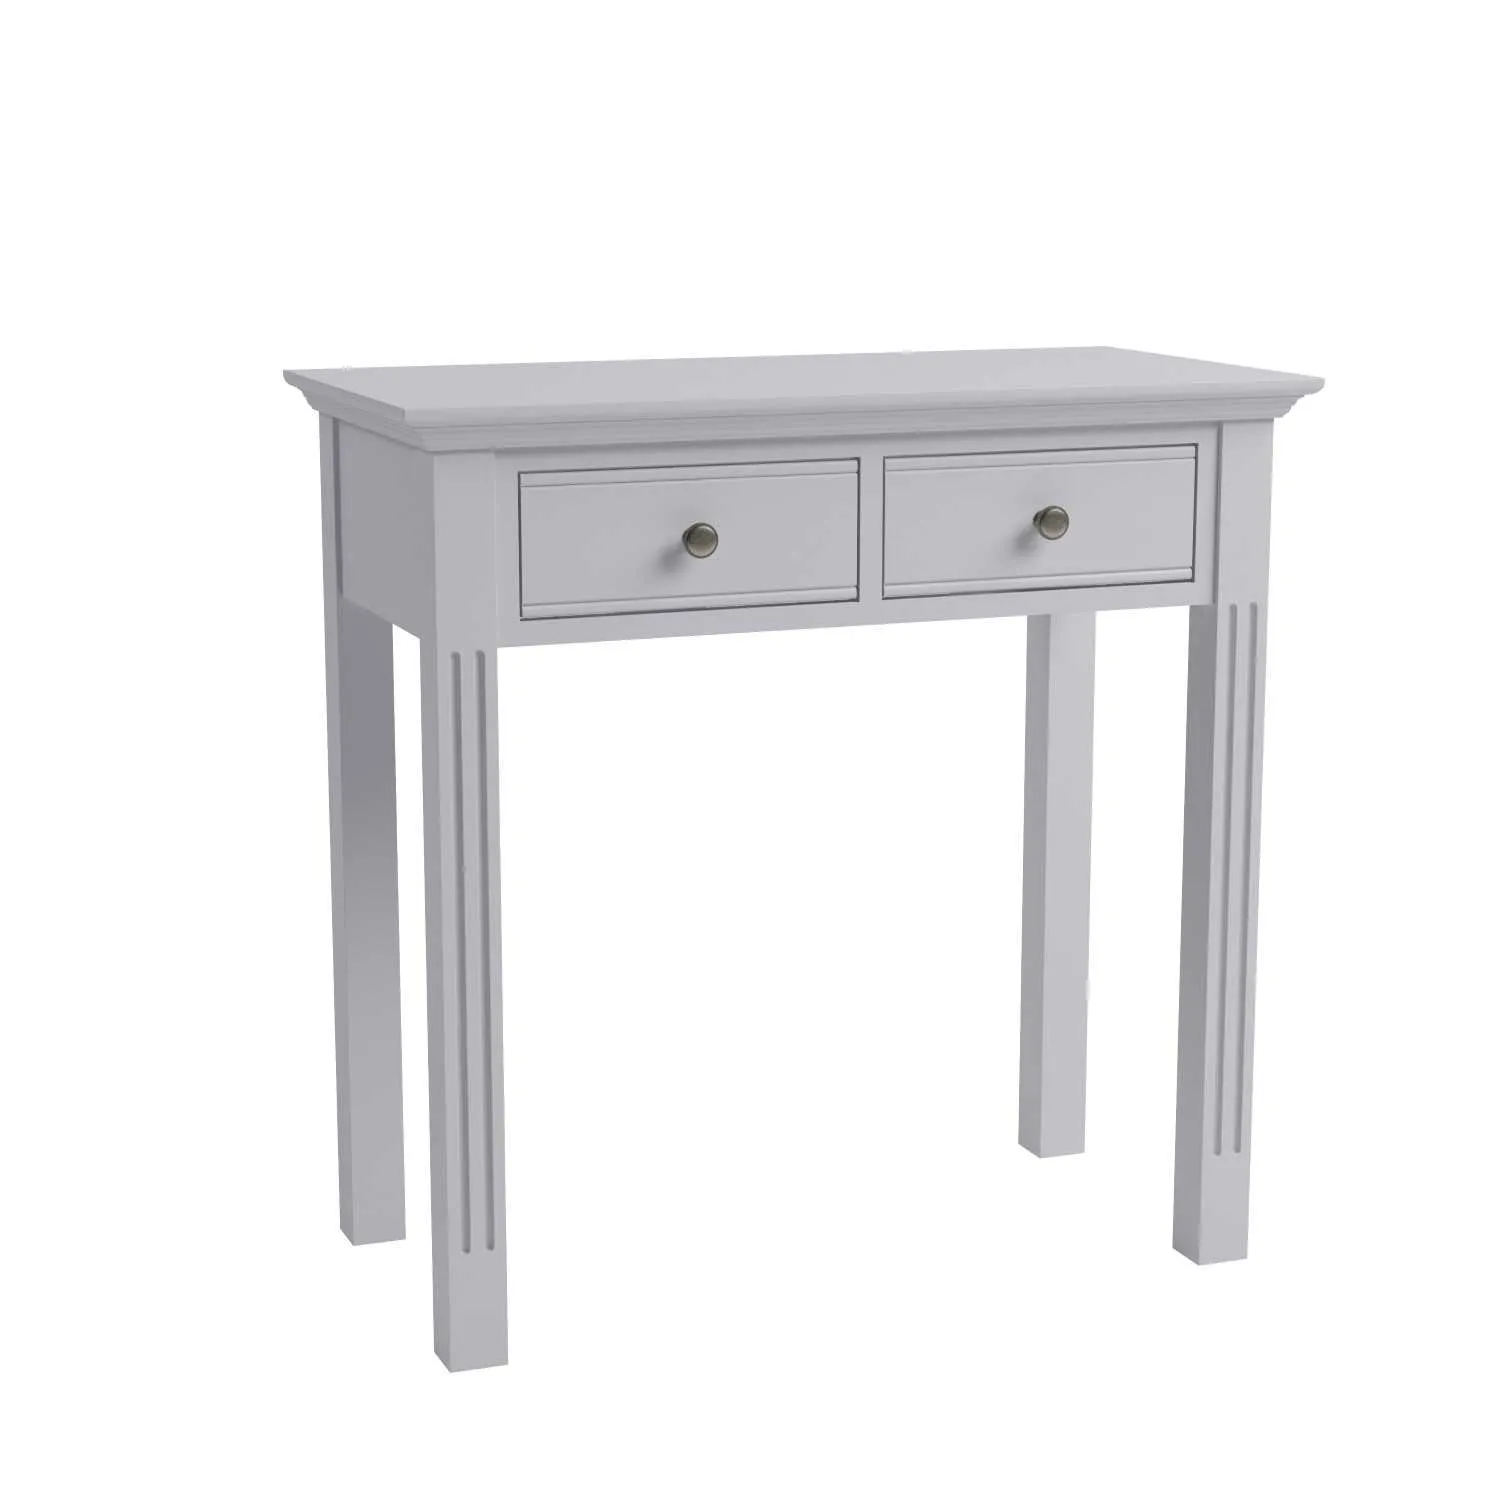 Traditional French Style Wooden Grey Painted 2 Drawer Bedroom Dressing Table 80 x 80cm